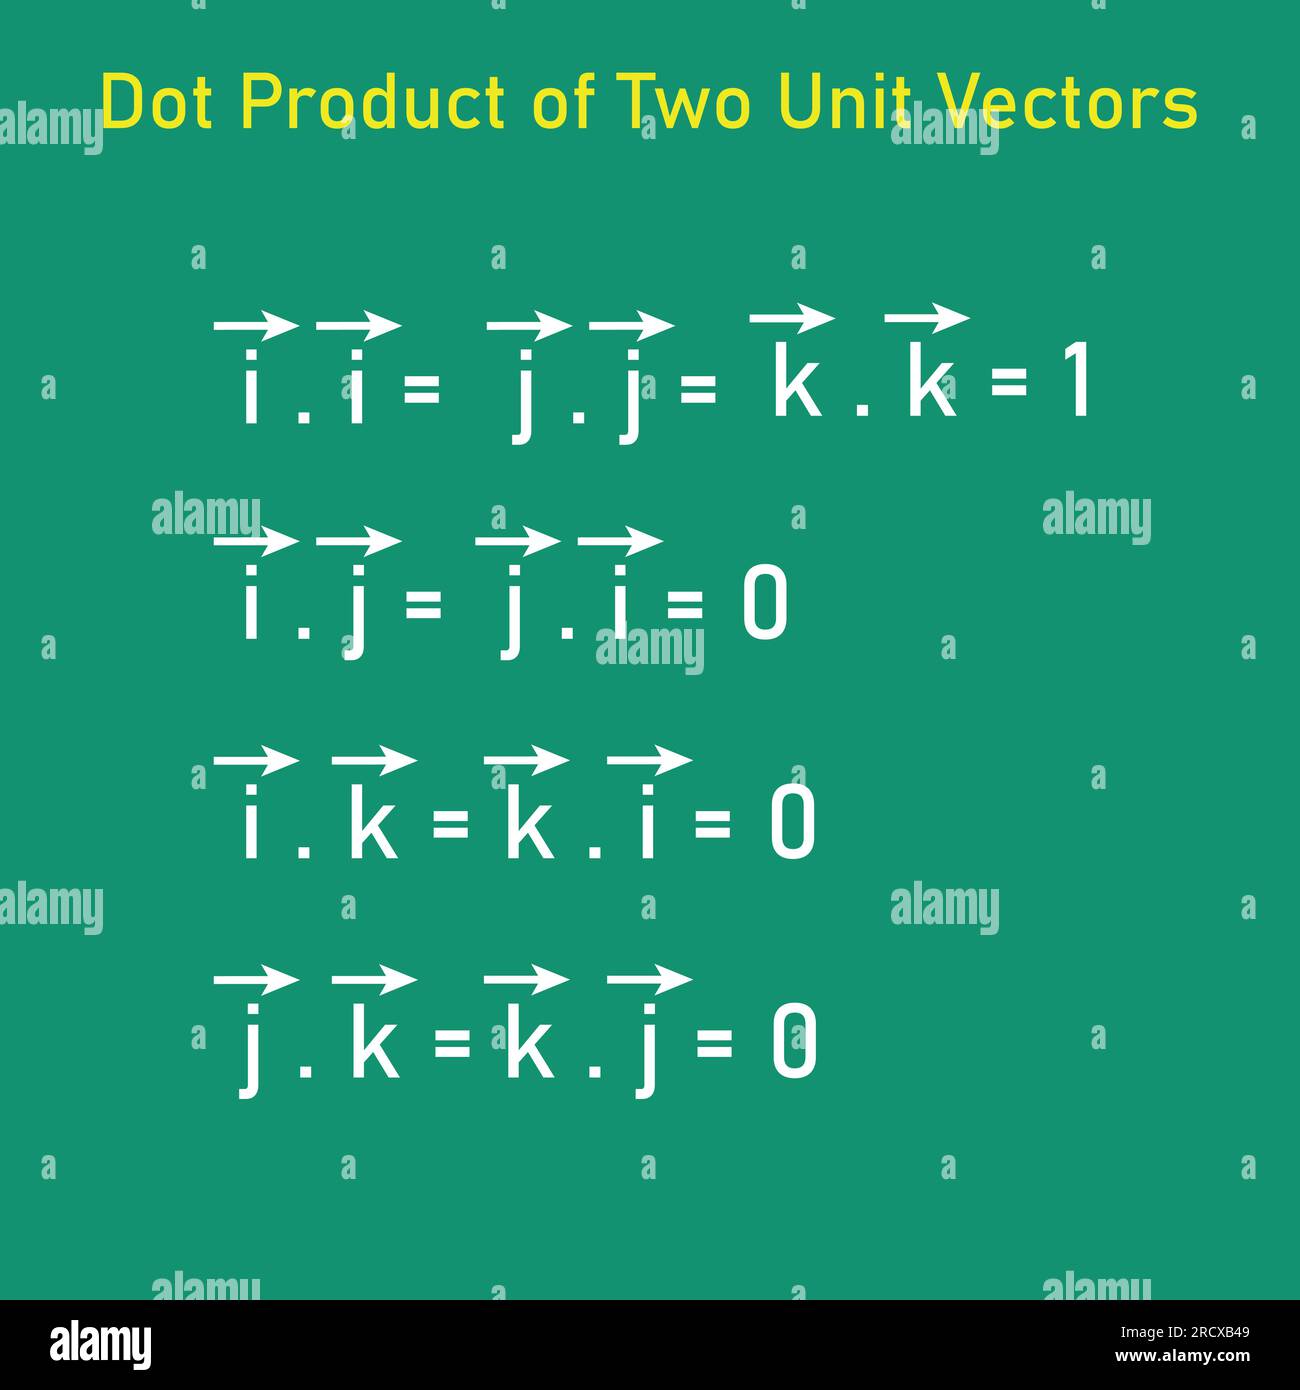 Dot product of two unit vectors. Vector illustration isolated on chalkboard. Stock Vector